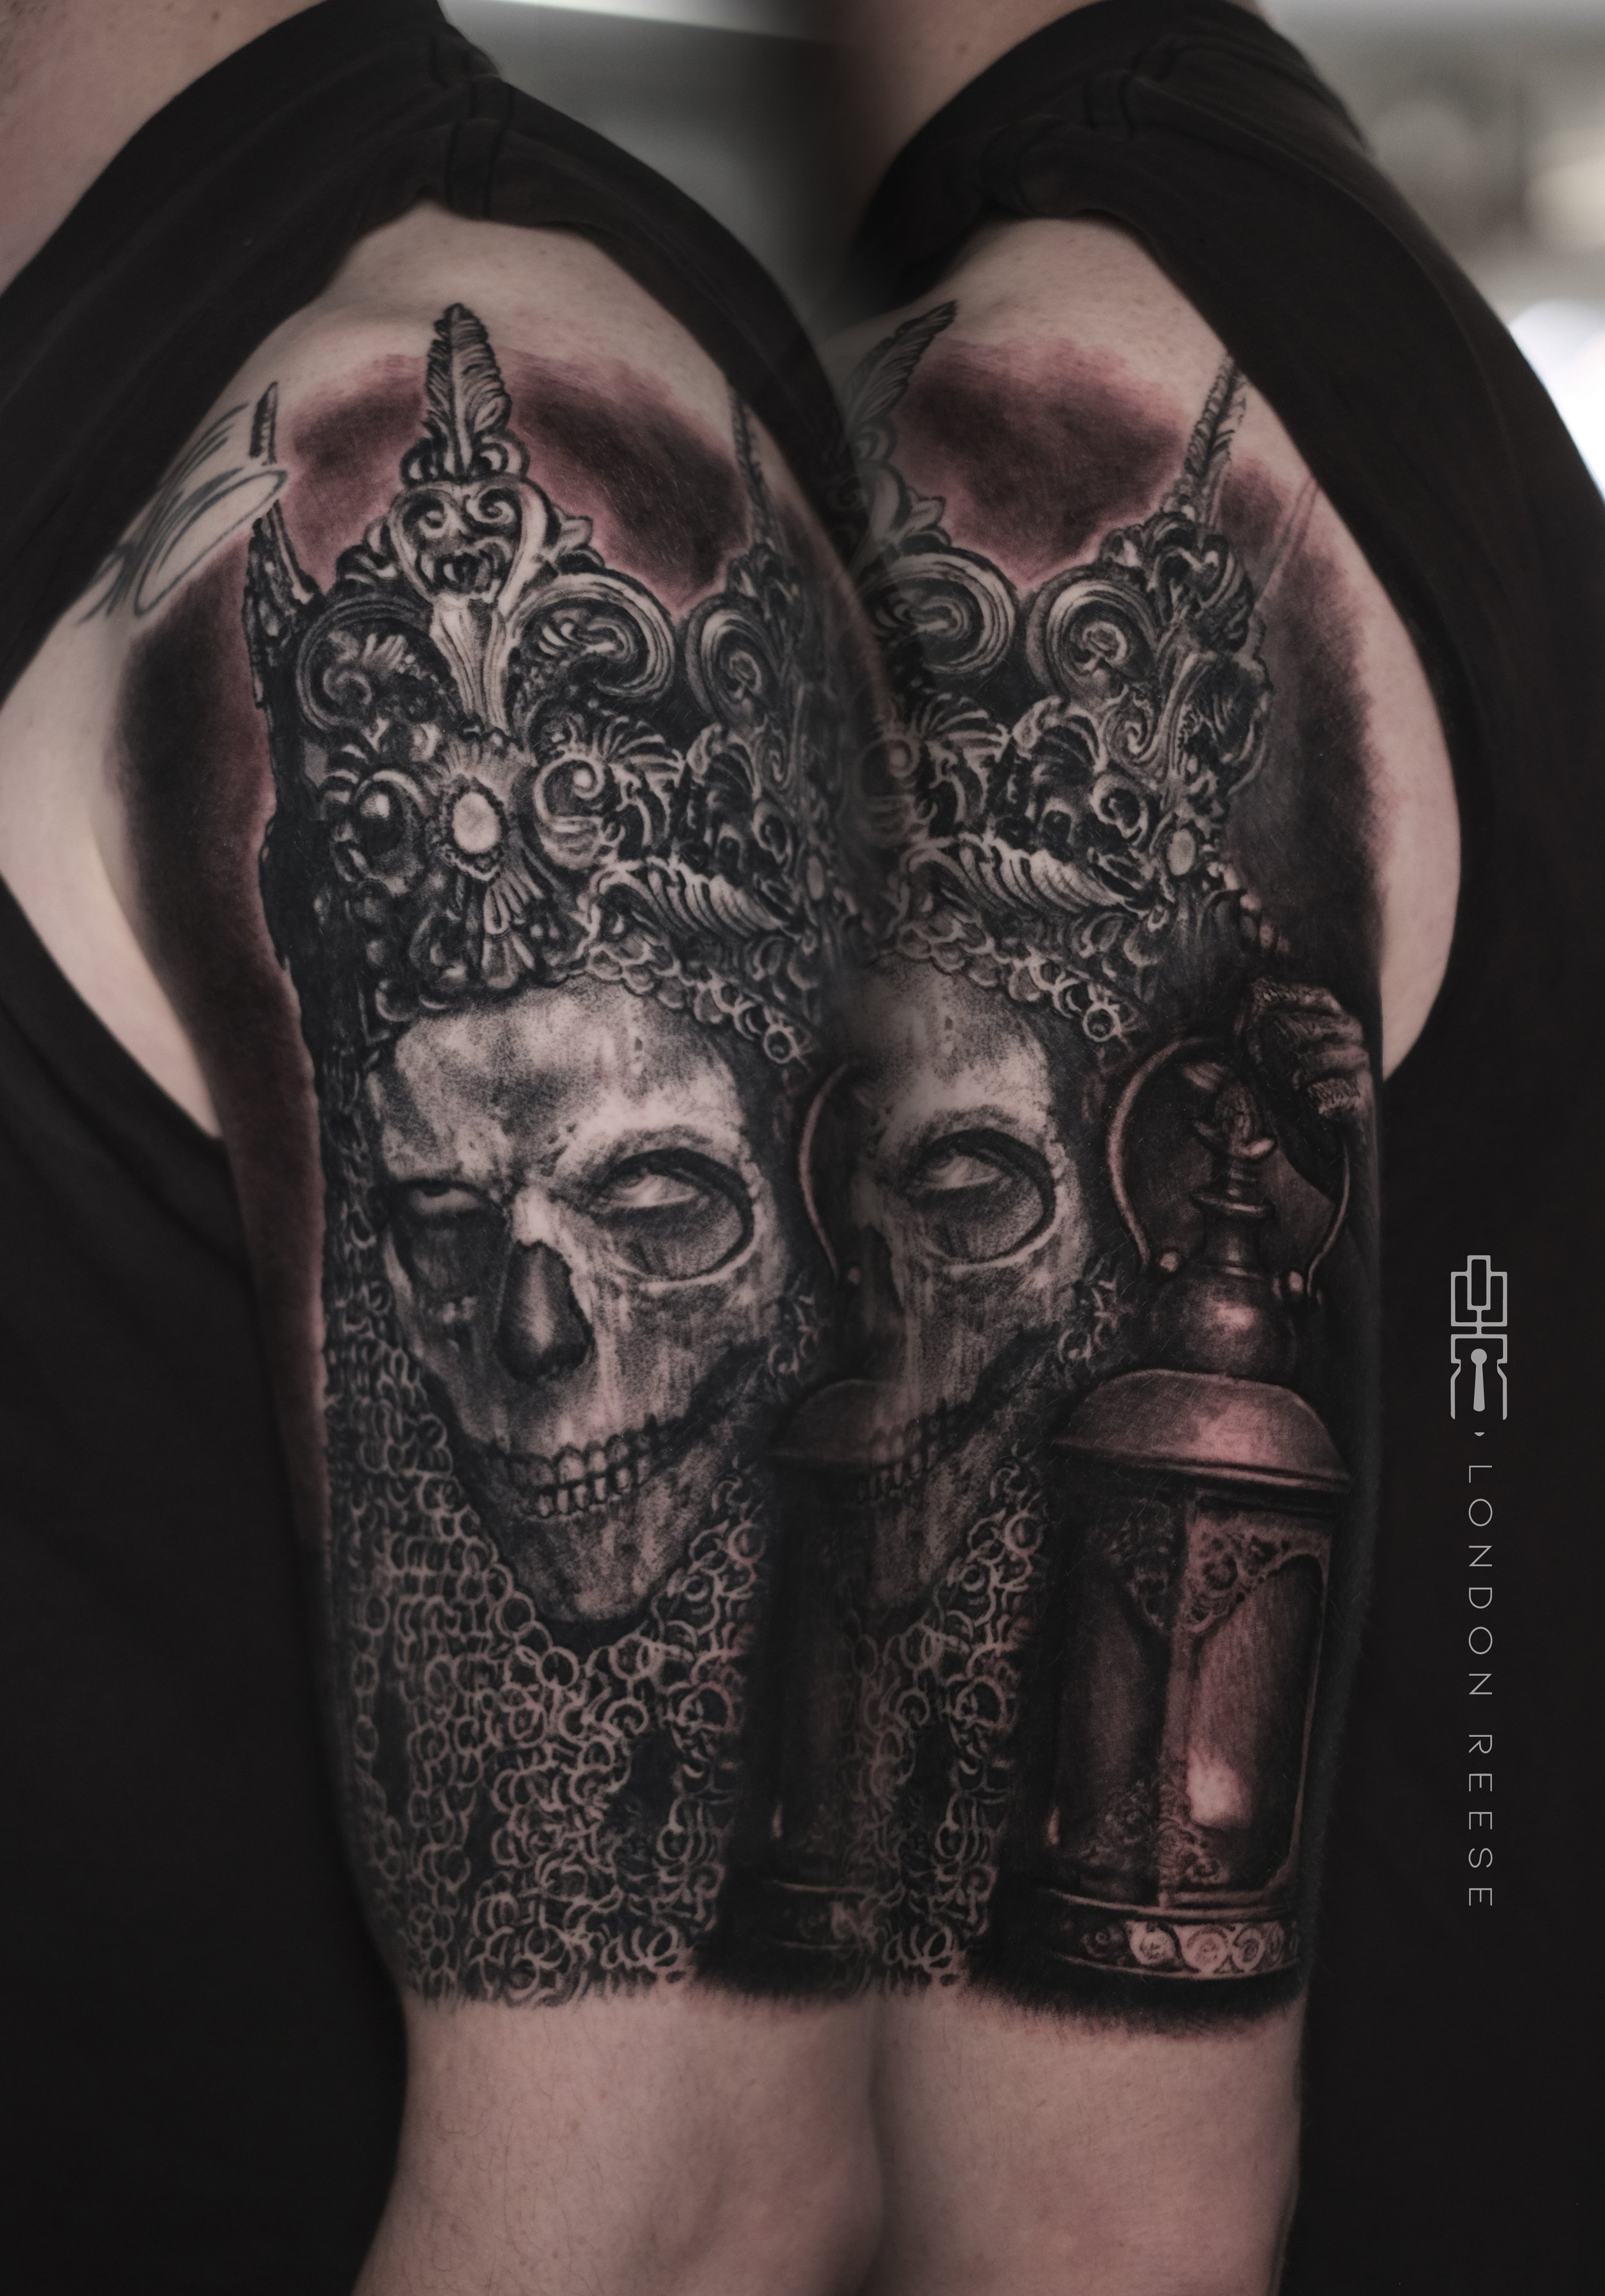 suicide silence thinking in tongues grim reaper tattoo.jpg